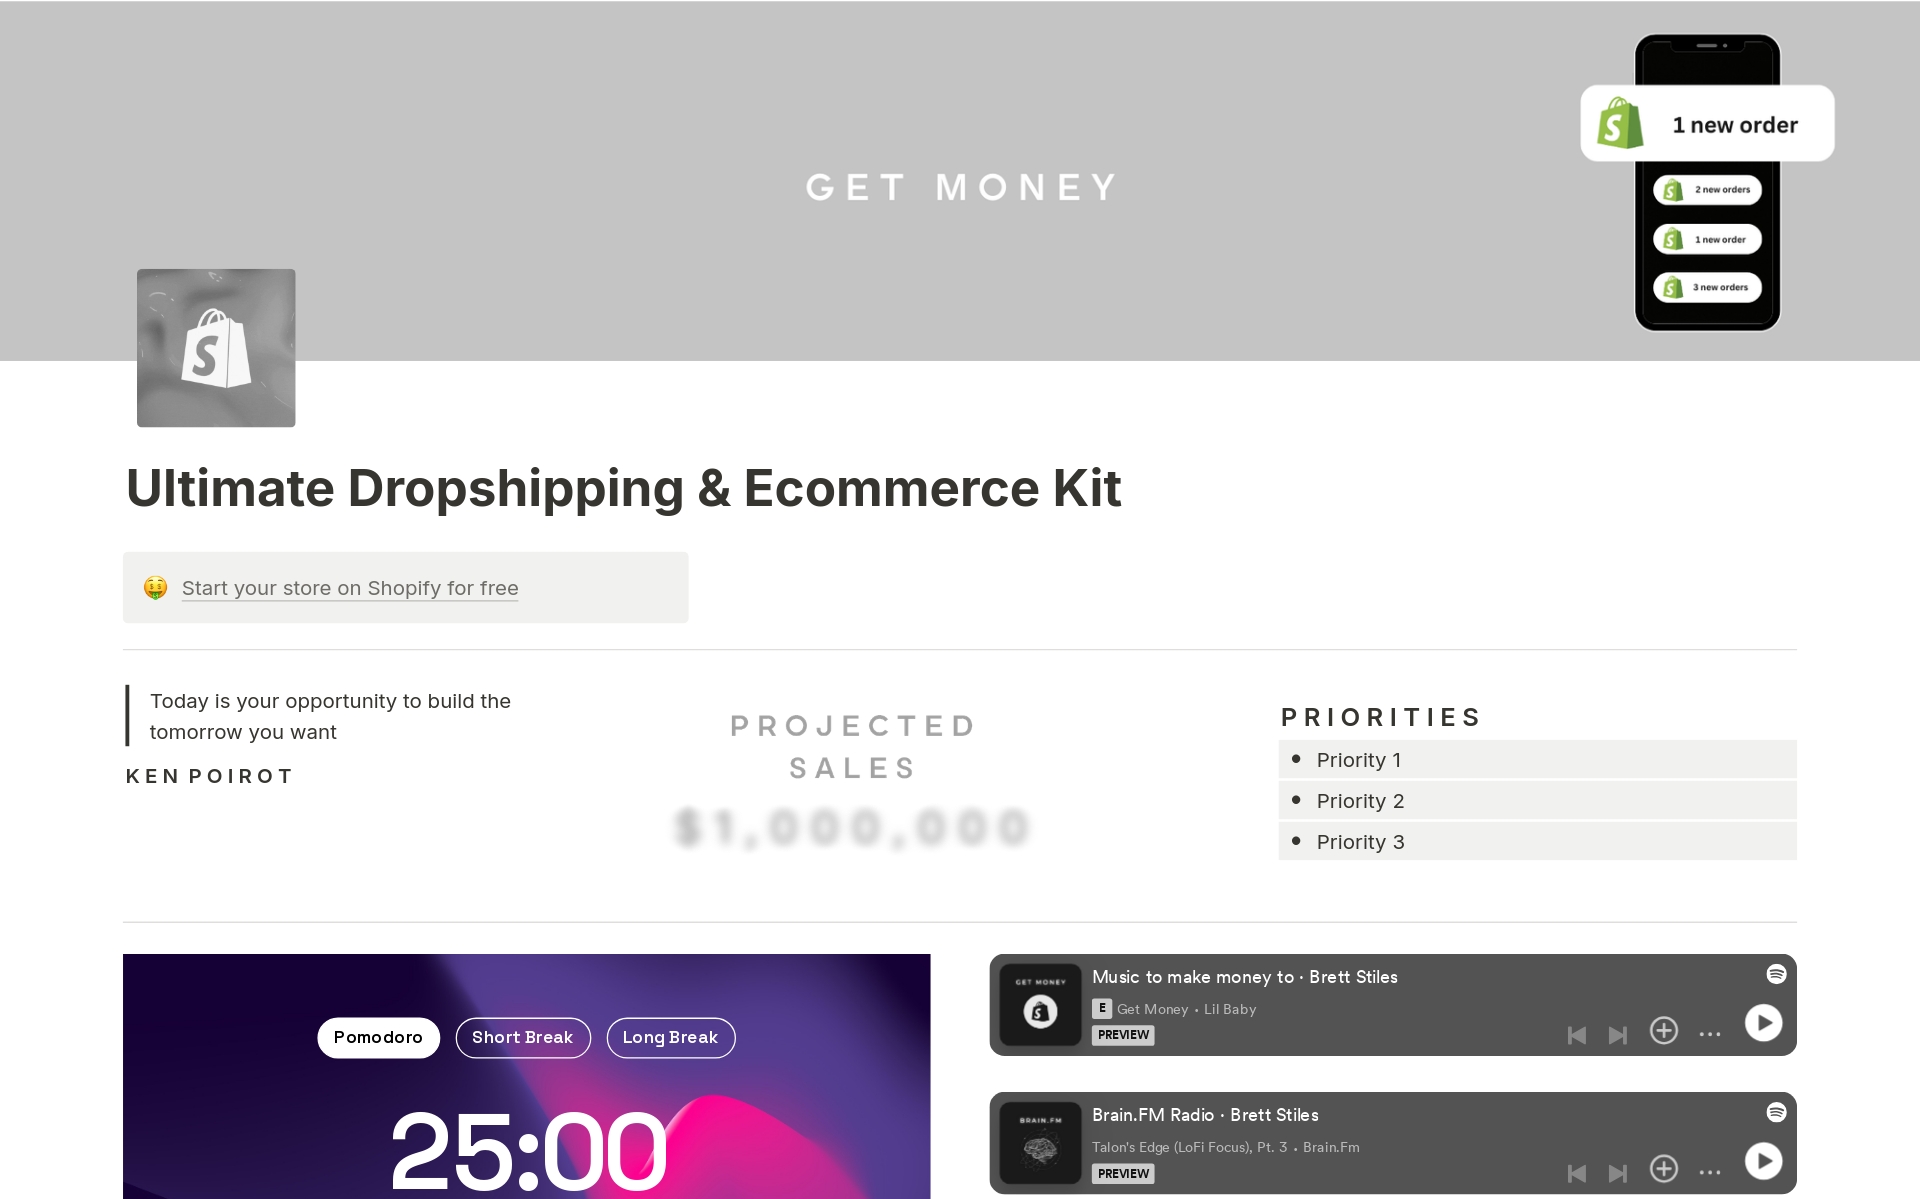 Your All-In-One Solution for Launching, Managing, and Scaling Your Profitable Online Store – All in One Place.